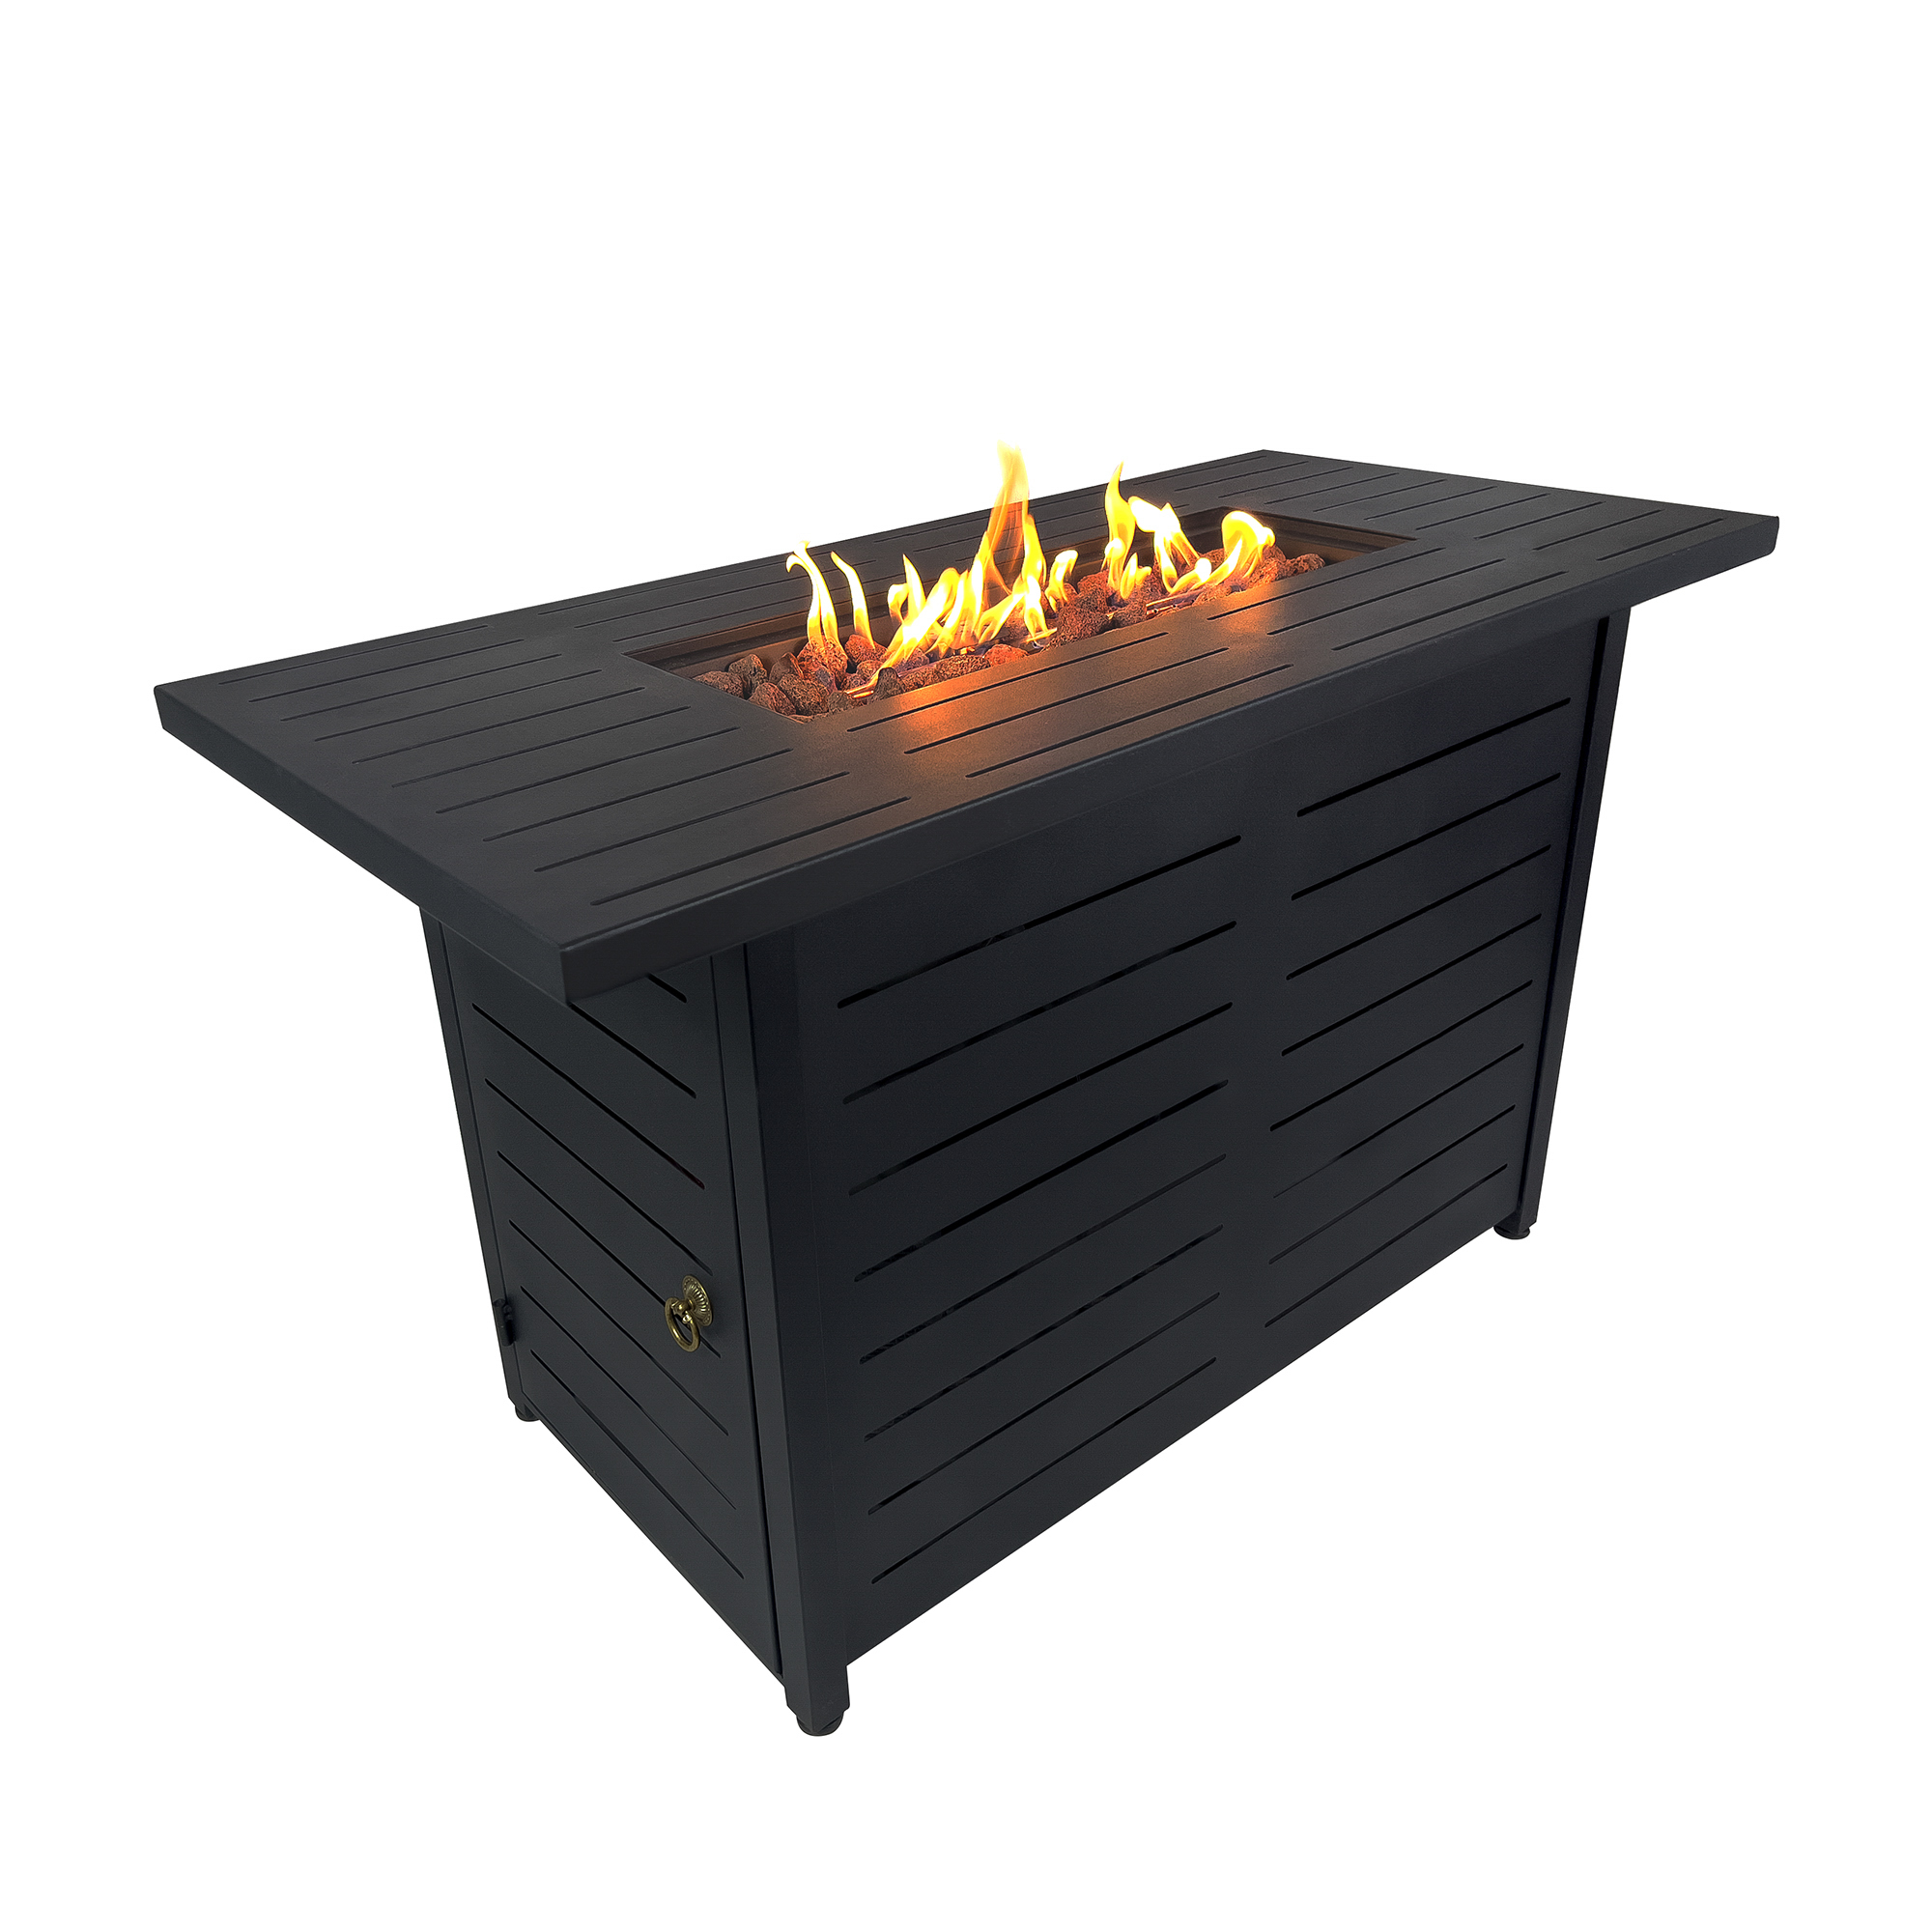 Kinger Home 42 inch Outdoor Propane Fire Pit Table for Patio, 50,000 BTU CSA Certified, Aluminum Frame, Lid, Weather Cover, Lava Rocks - image 1 of 9